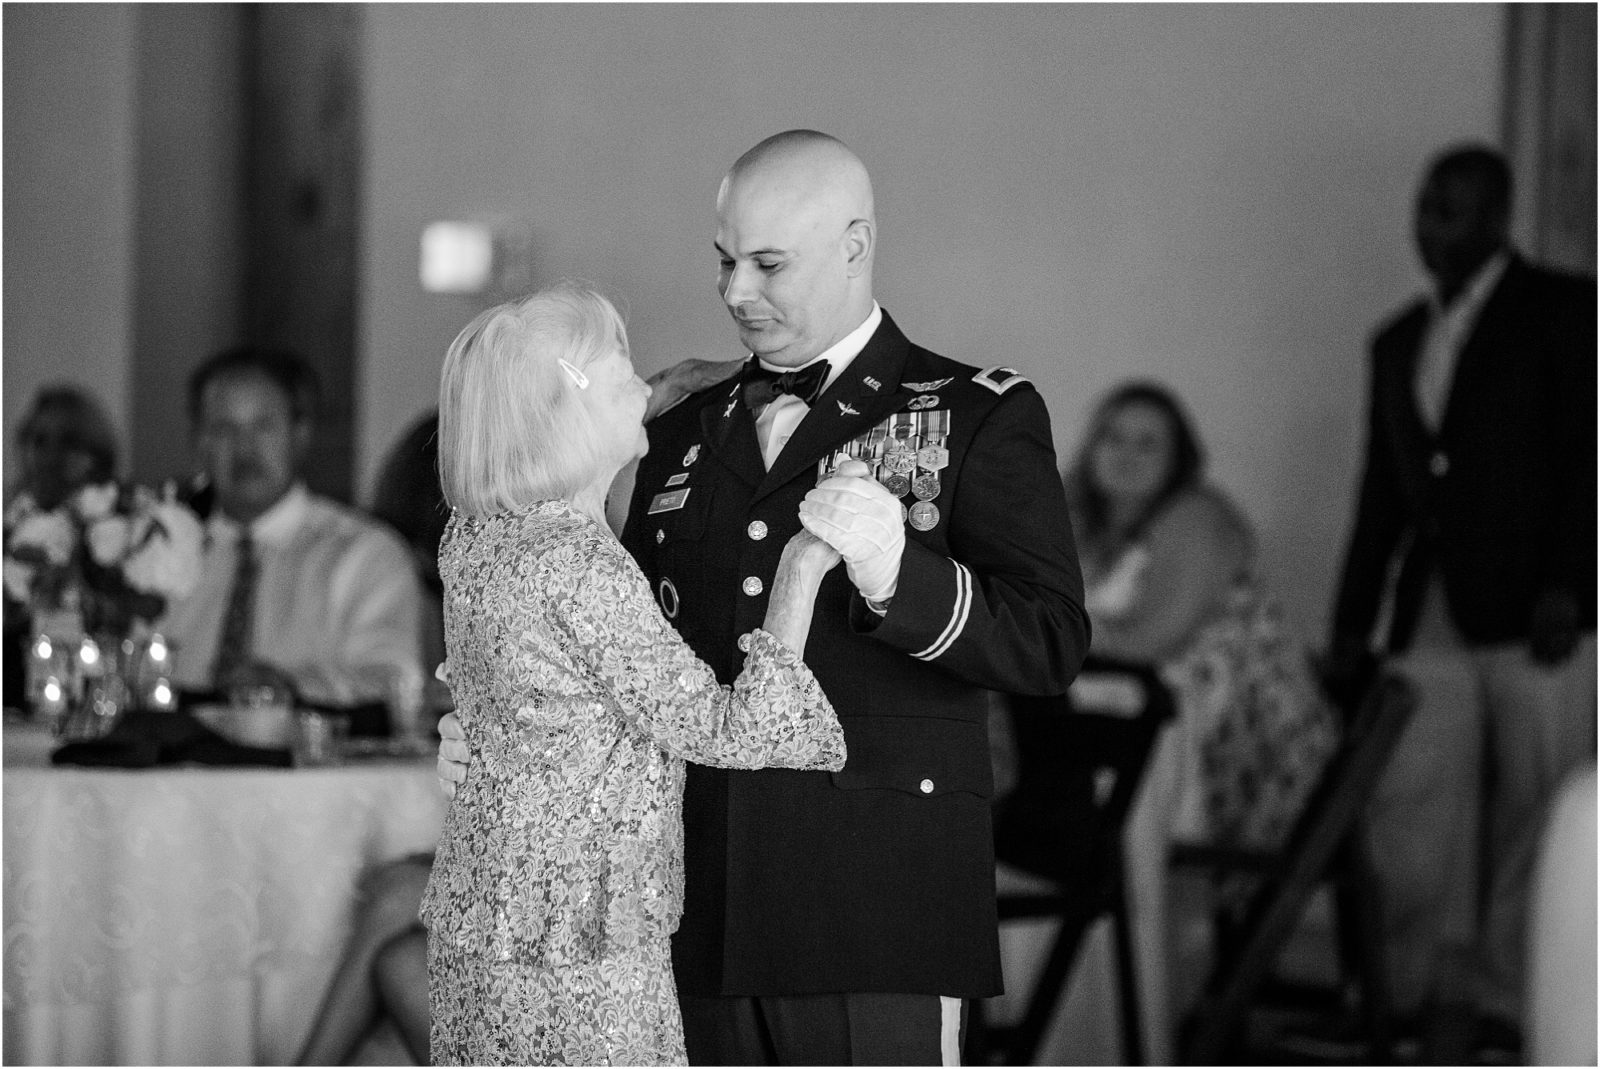 Military groom dancing with his mother